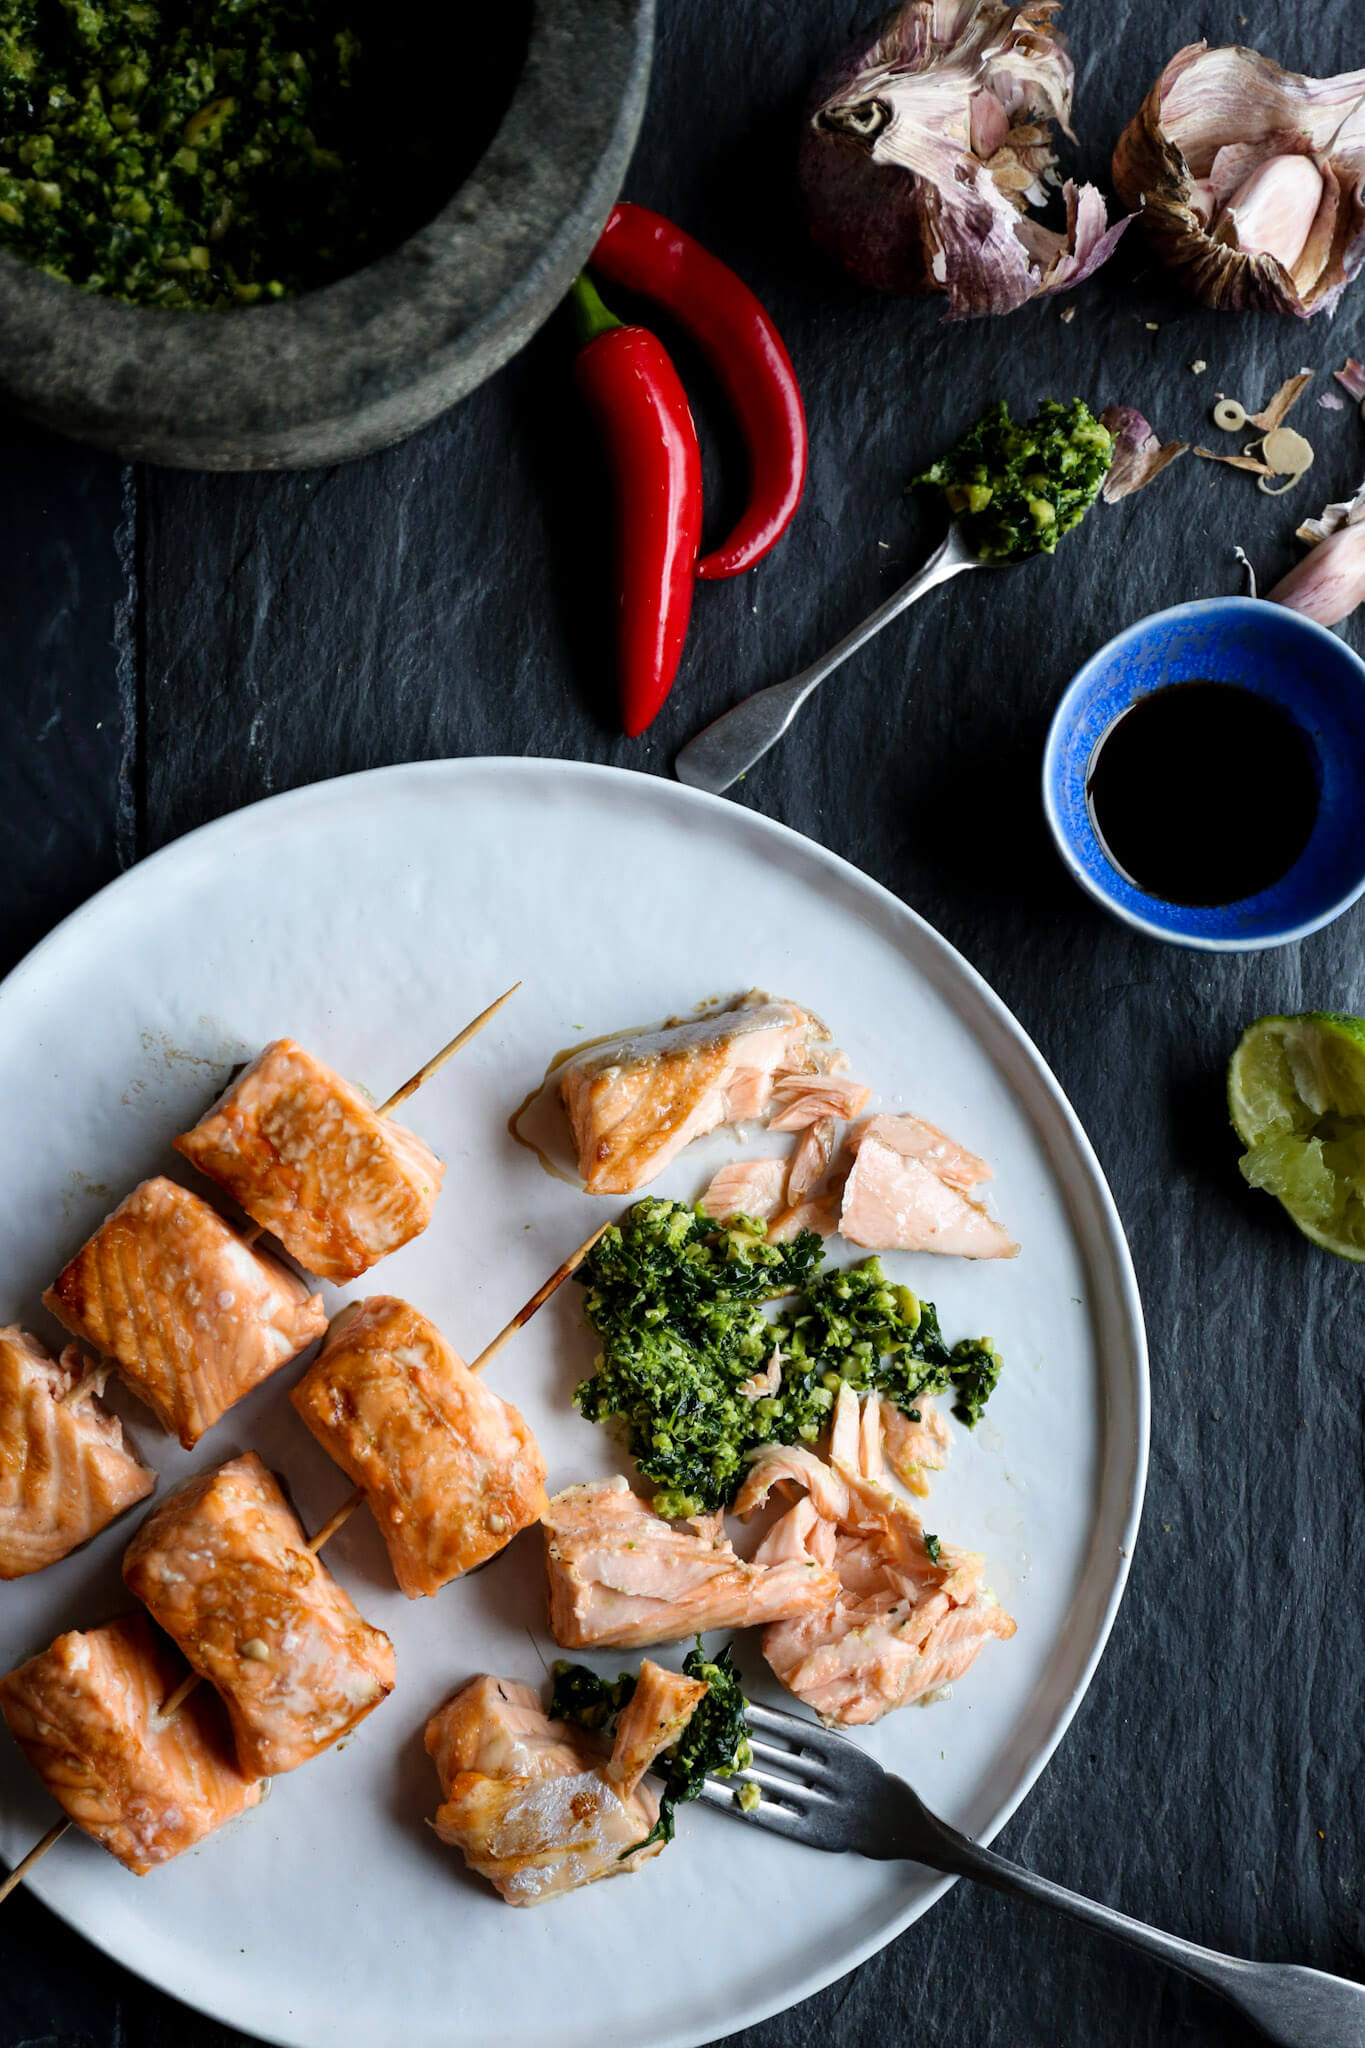 Asian Inspired Pesto with Baked Salmon Skewers